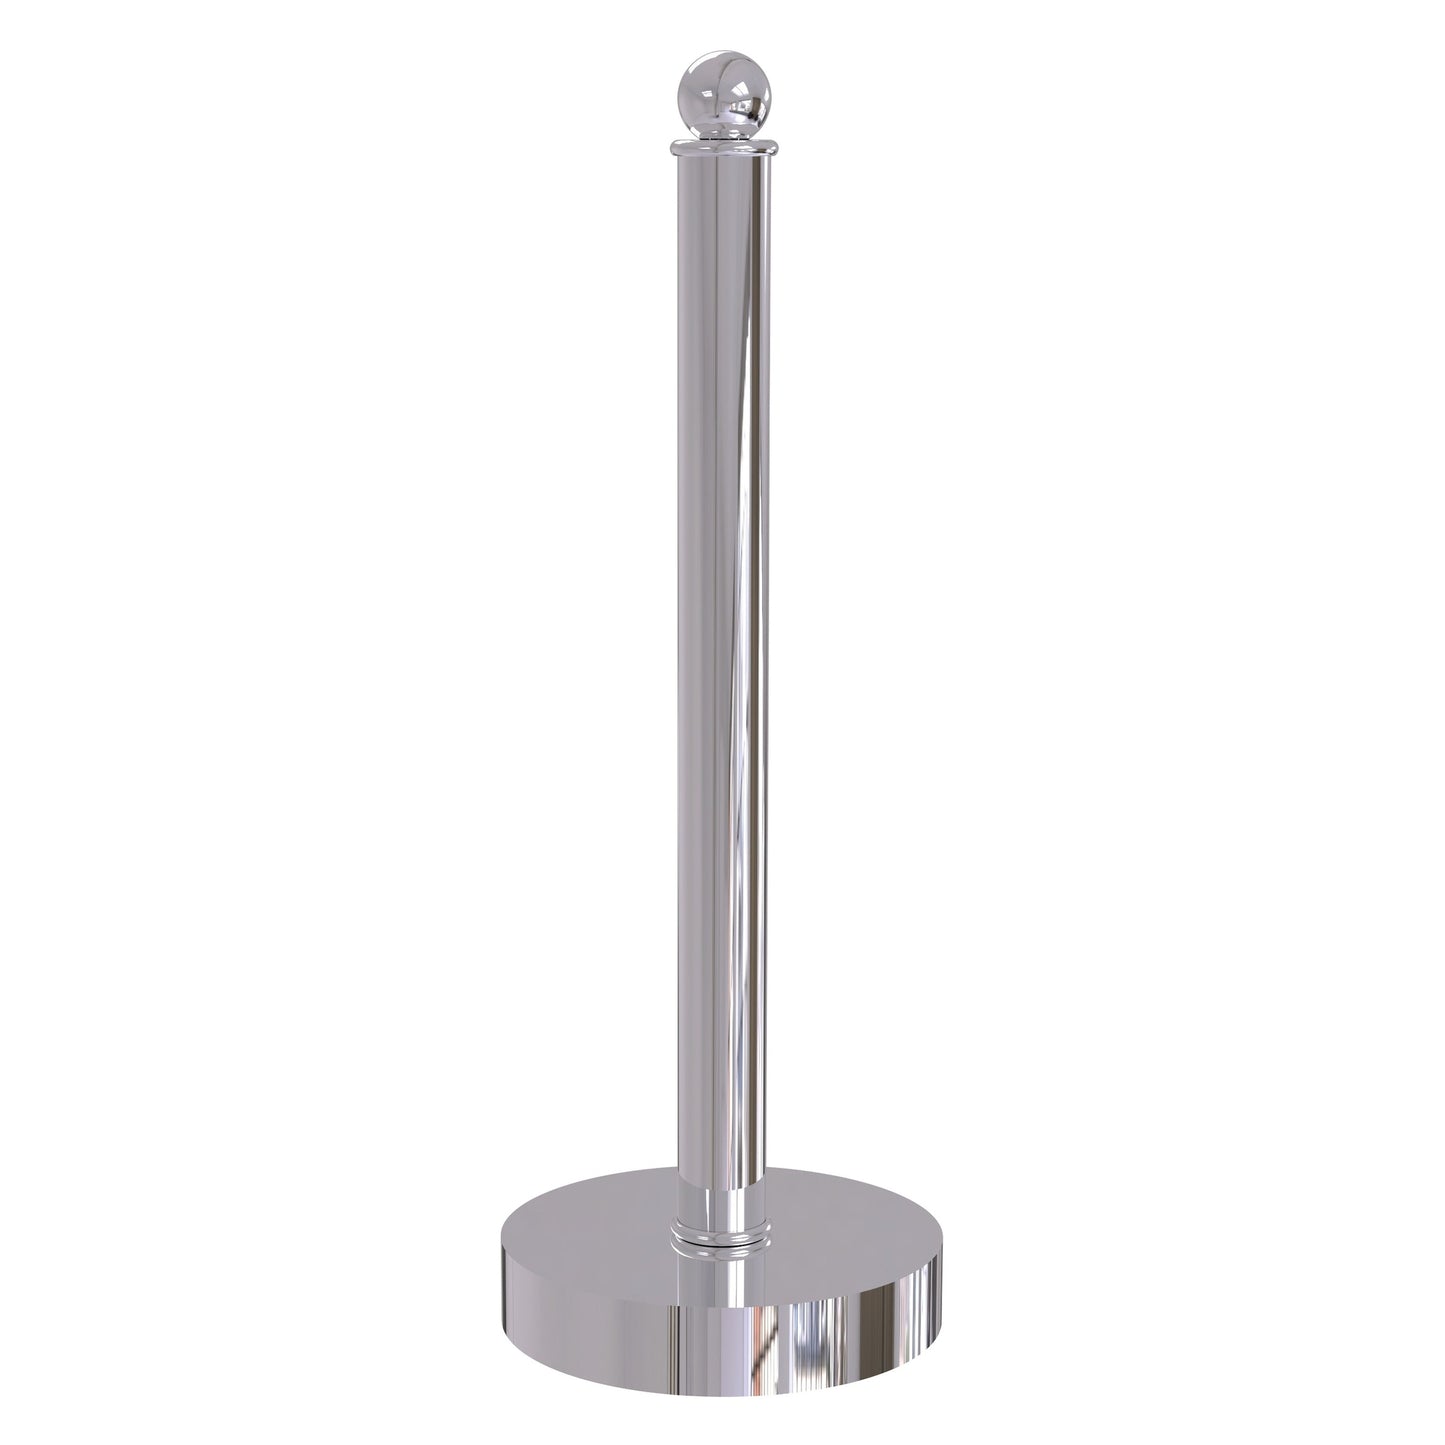 Allied Brass 1051 5" Polished Chrome Solid Brass Paper Towel Holder